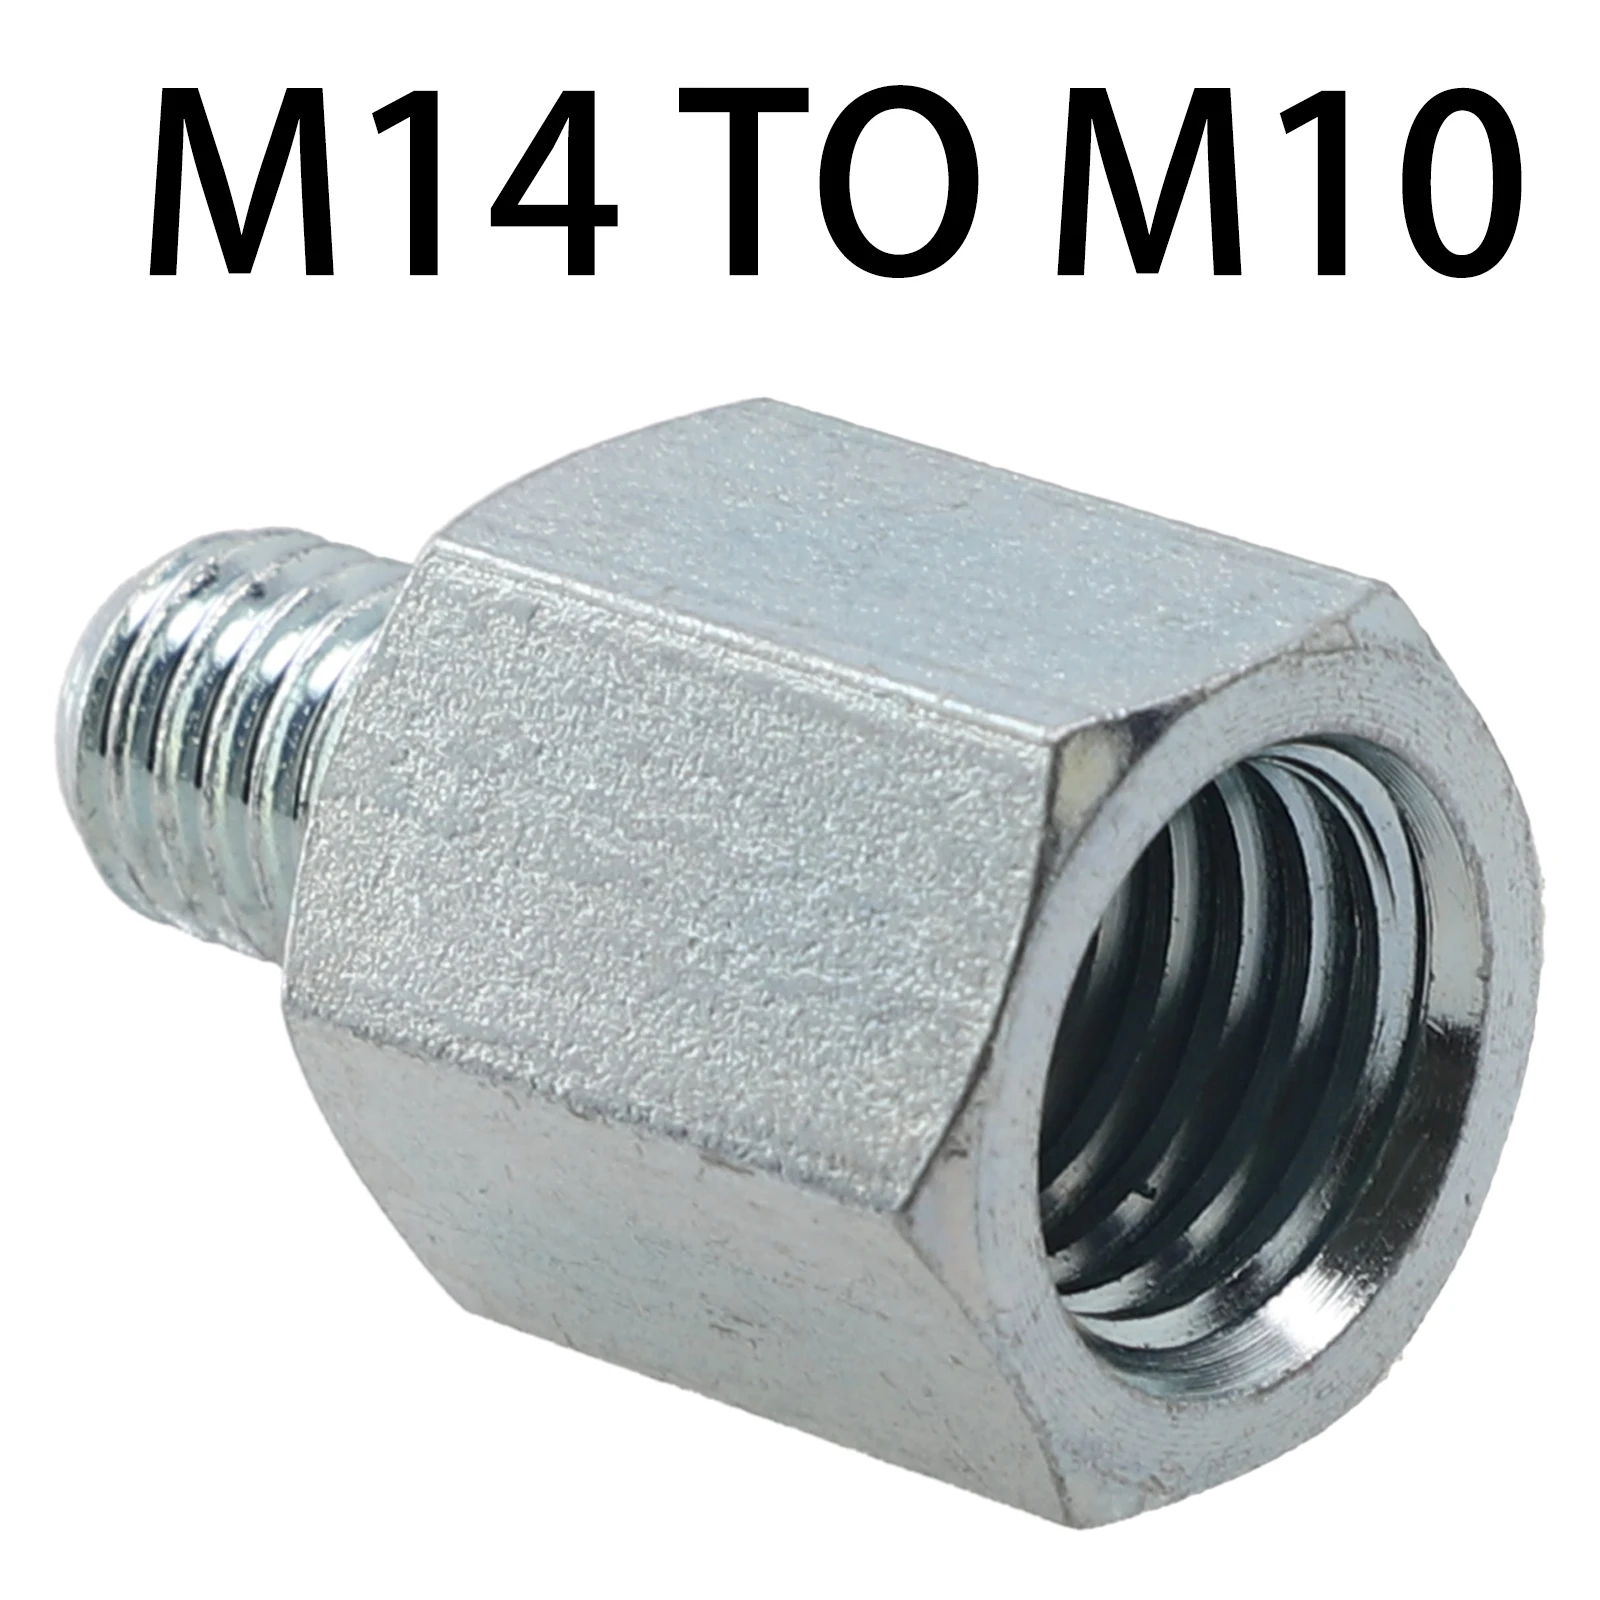 Angle Grinder Thread Adapter Connector Converter For Angle Grinder M10 To M14 M14 To M10 M14 To 5/8 -11 5/8 -11to M14 M16 To M14 dt diatool 2 pieces change thread converter 5 8 11 to m14 thread diamond core bits adapter for grinding wheel no 2